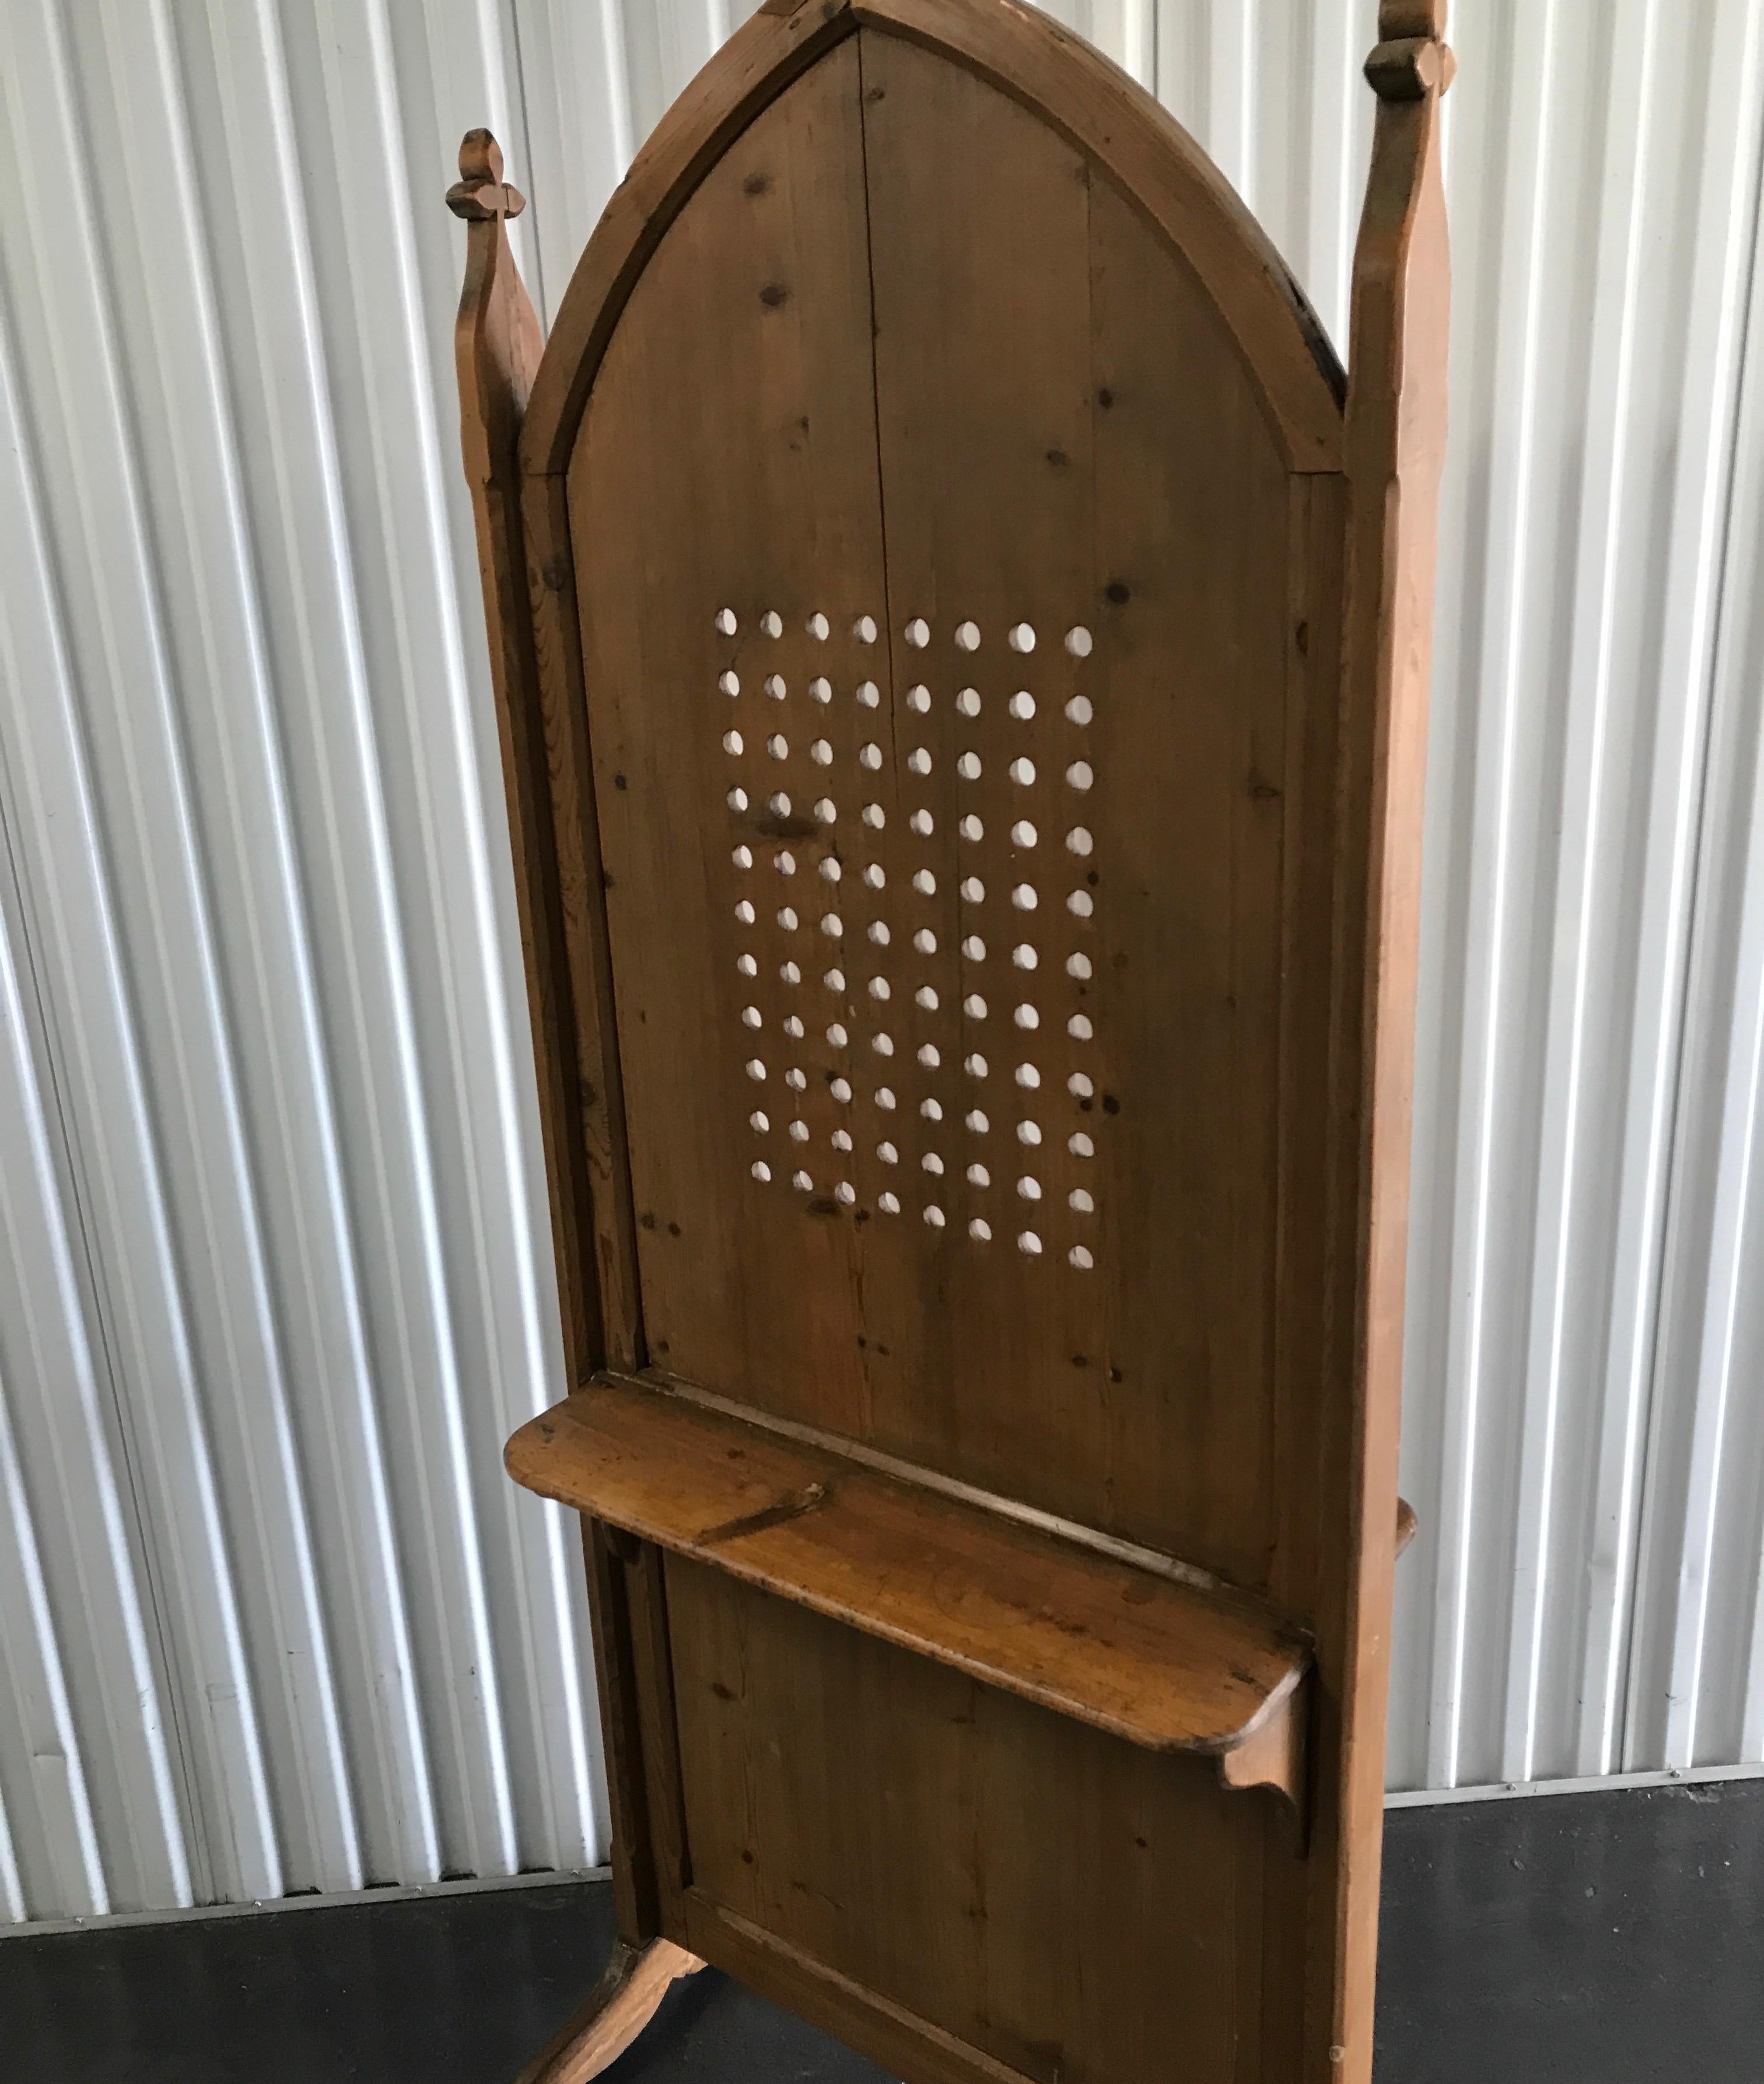 confessional booth dimensions